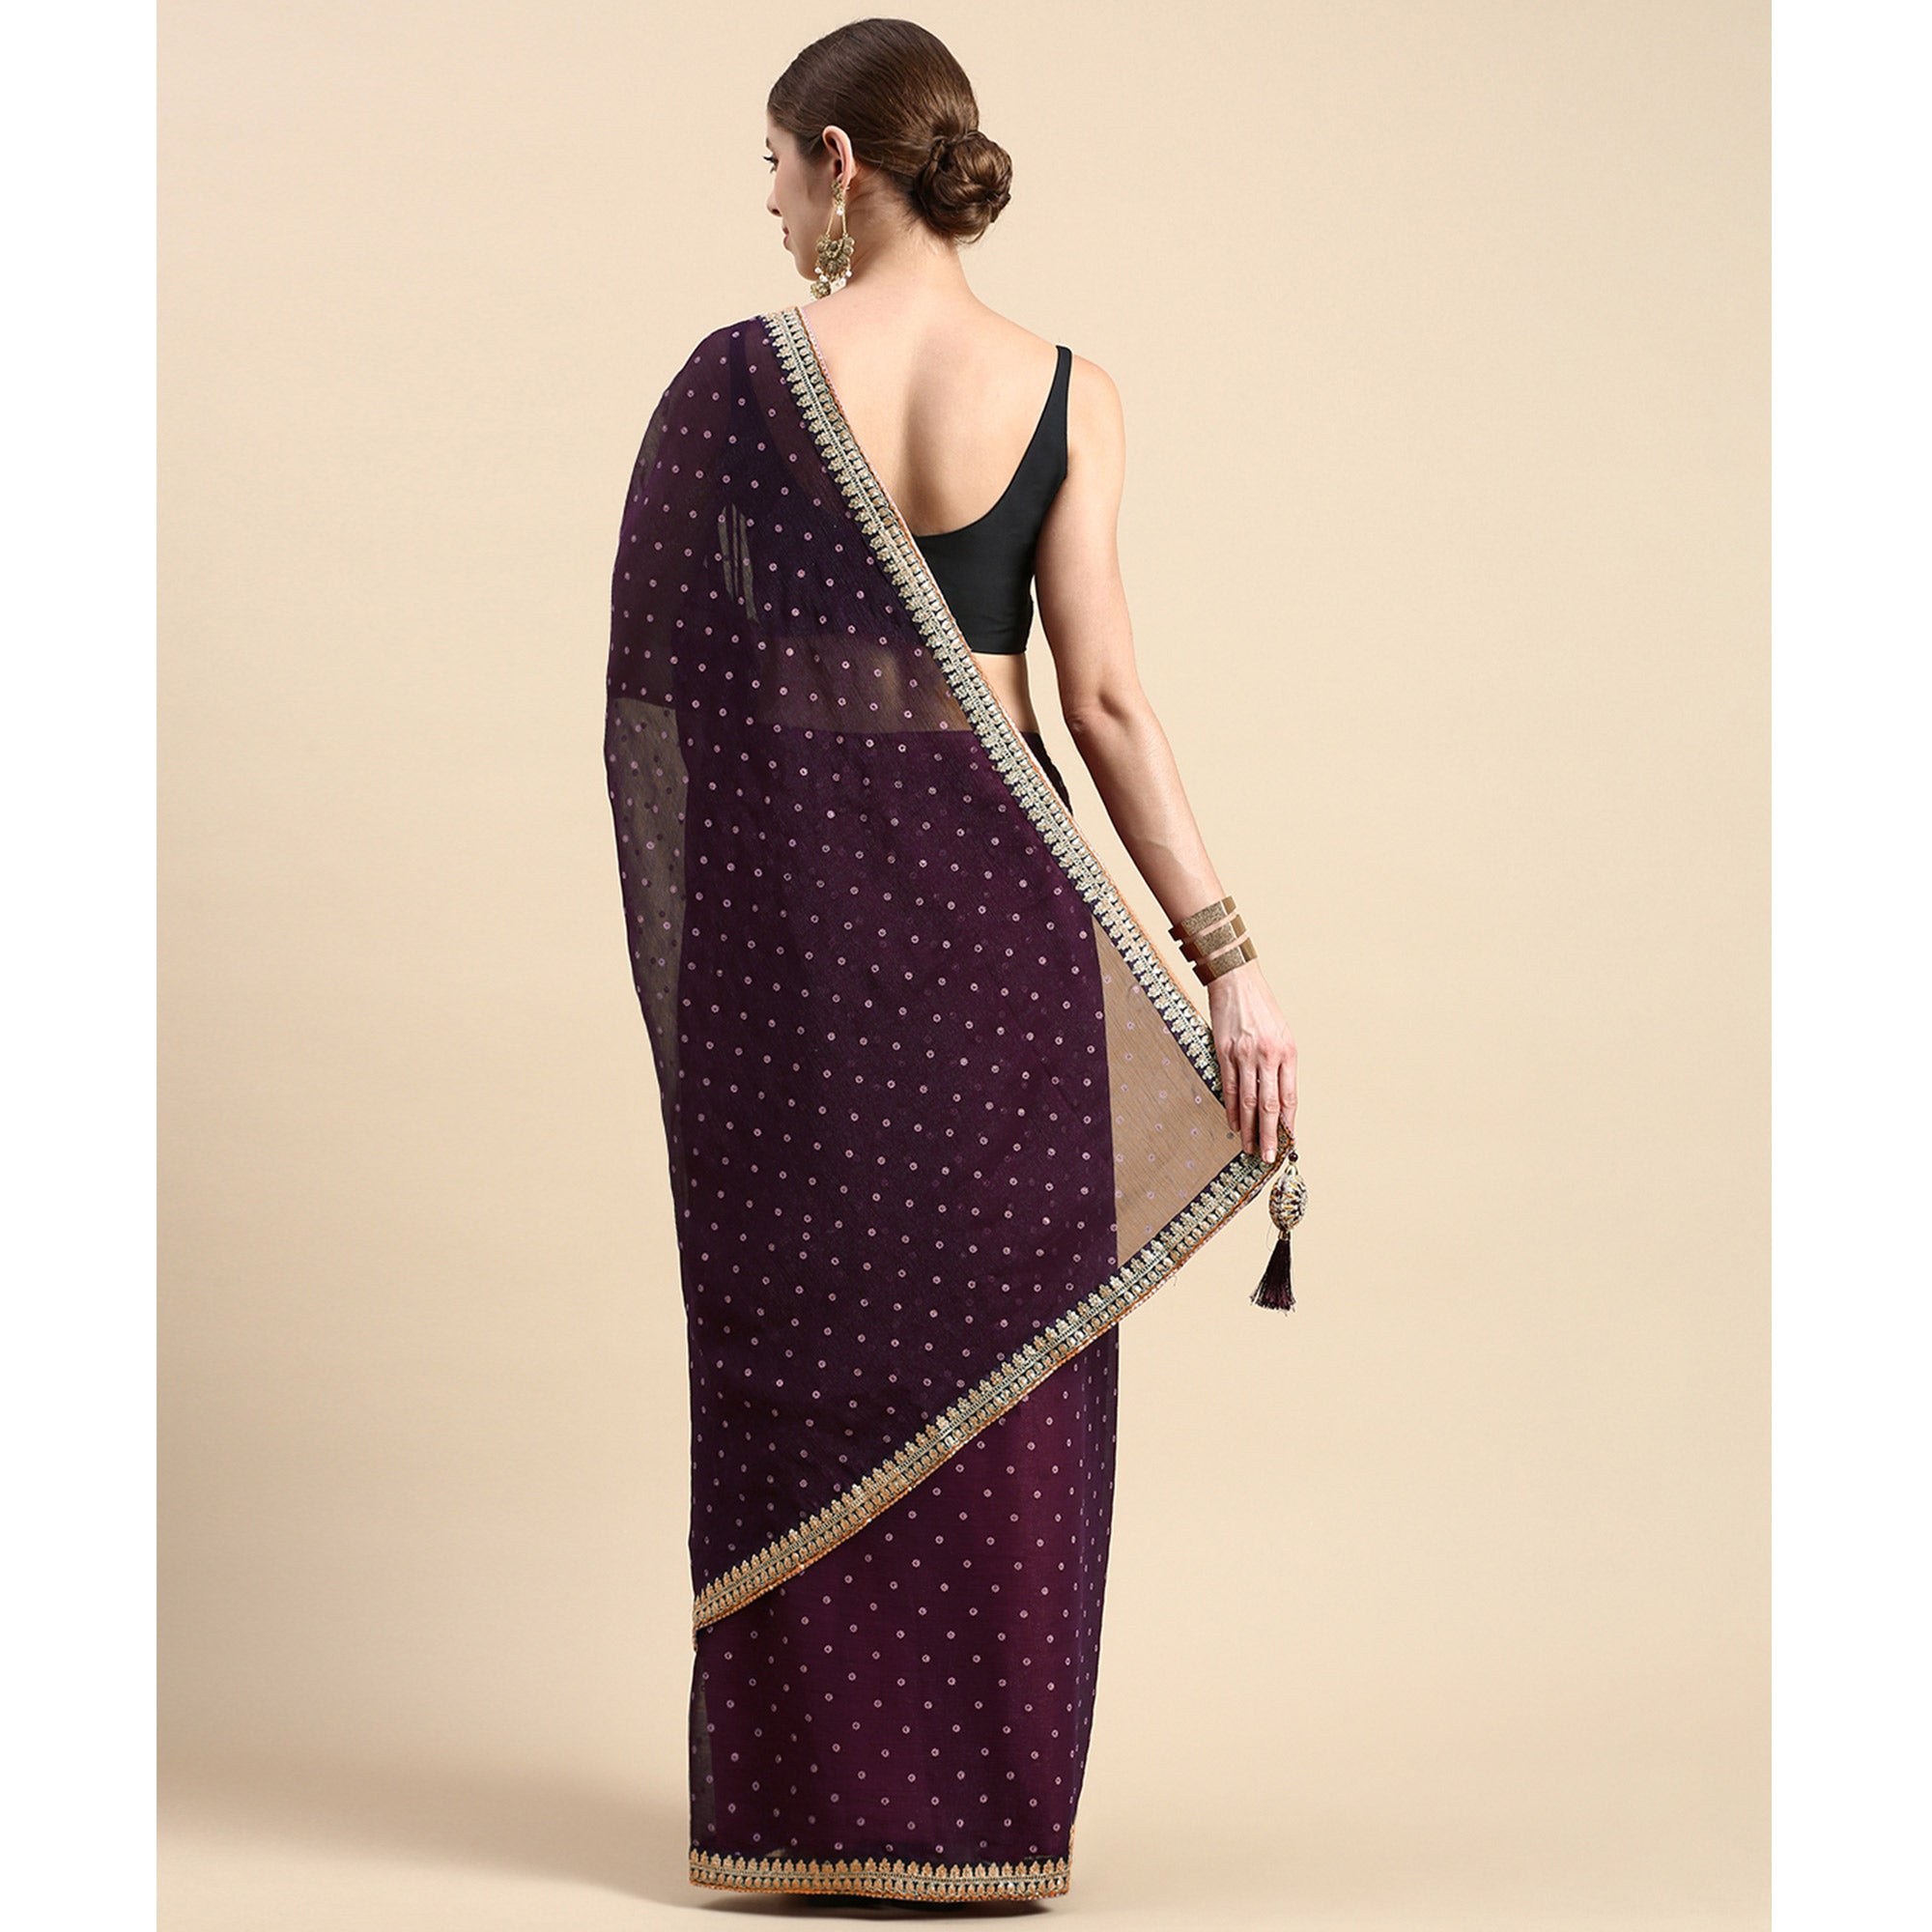 Purple Foil Printed With Embroidered Border Chiffon Saree